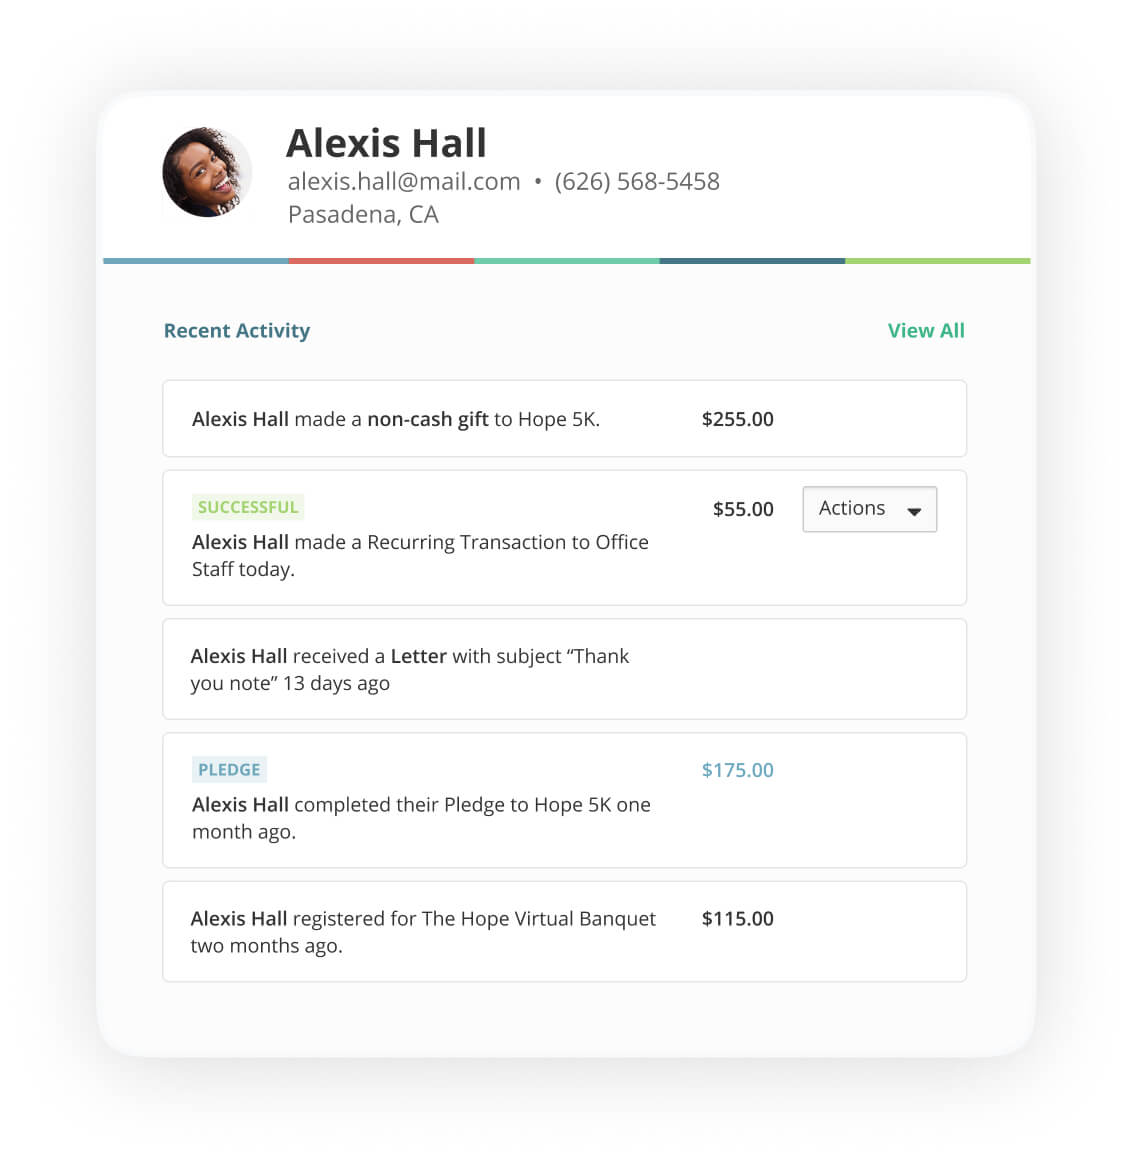 Contact profile of Alexis Hall, showing multiple online donations listed above and below her in-kind donation